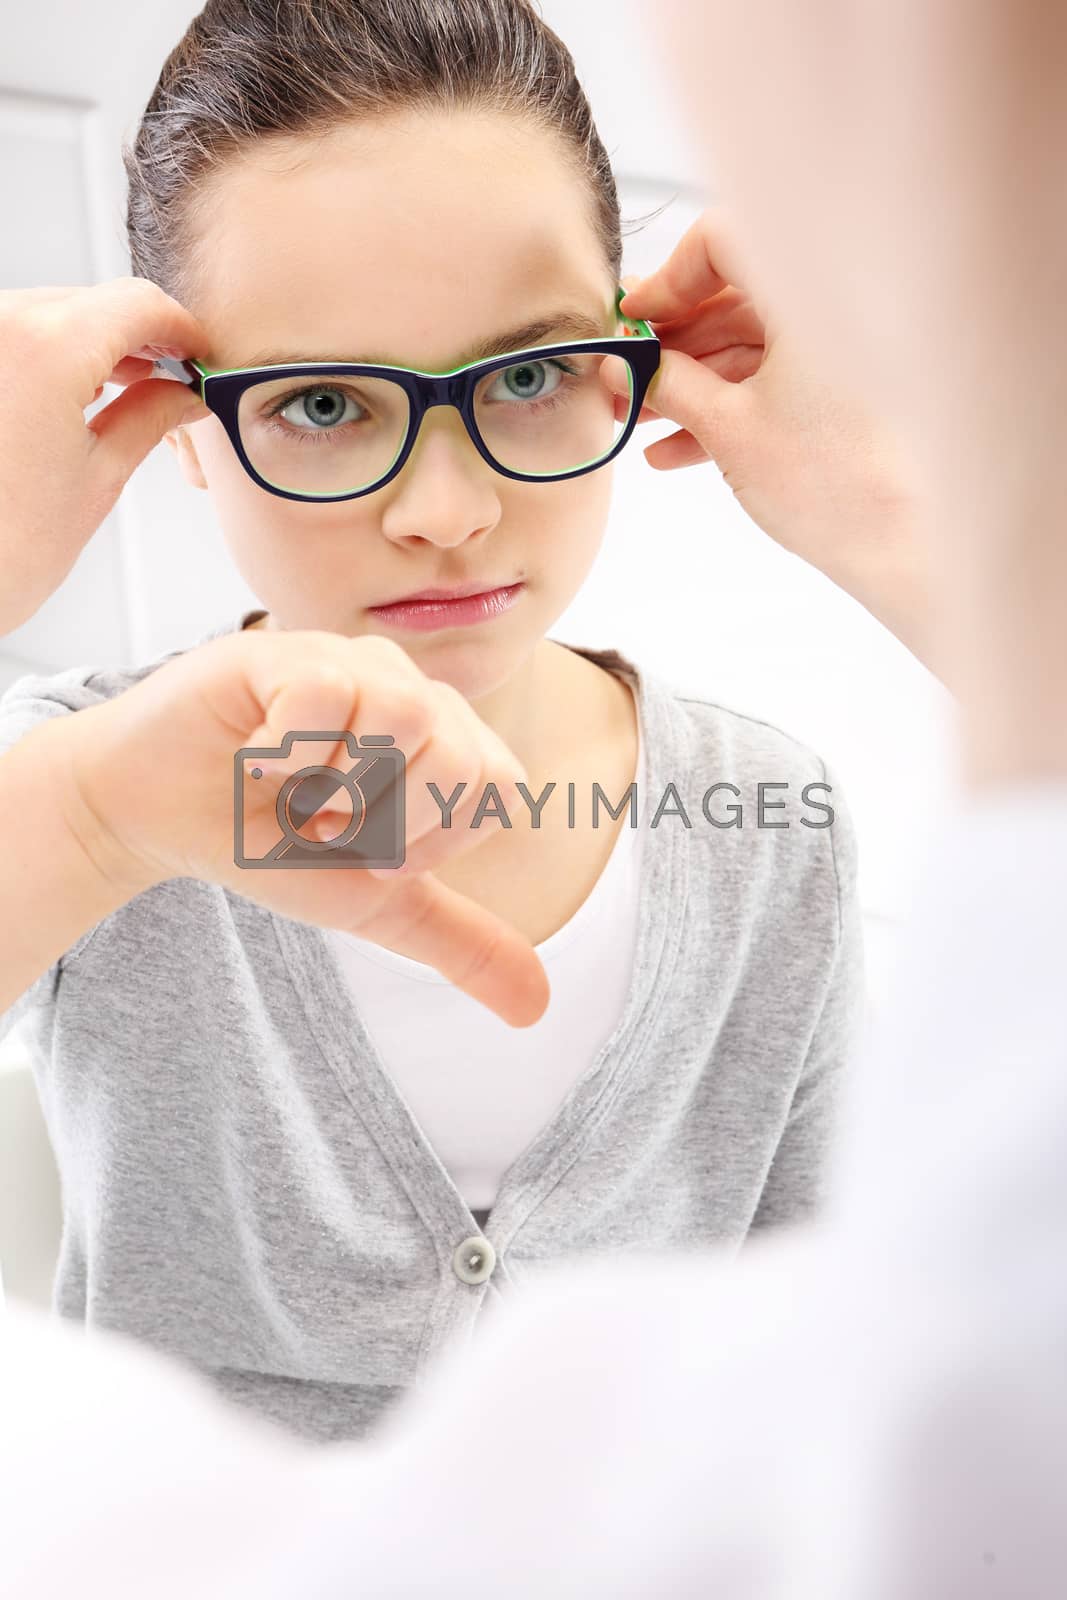 Royalty free image of Selection of glasses, a little girl with an ophthalmologist. by robert_przybysz